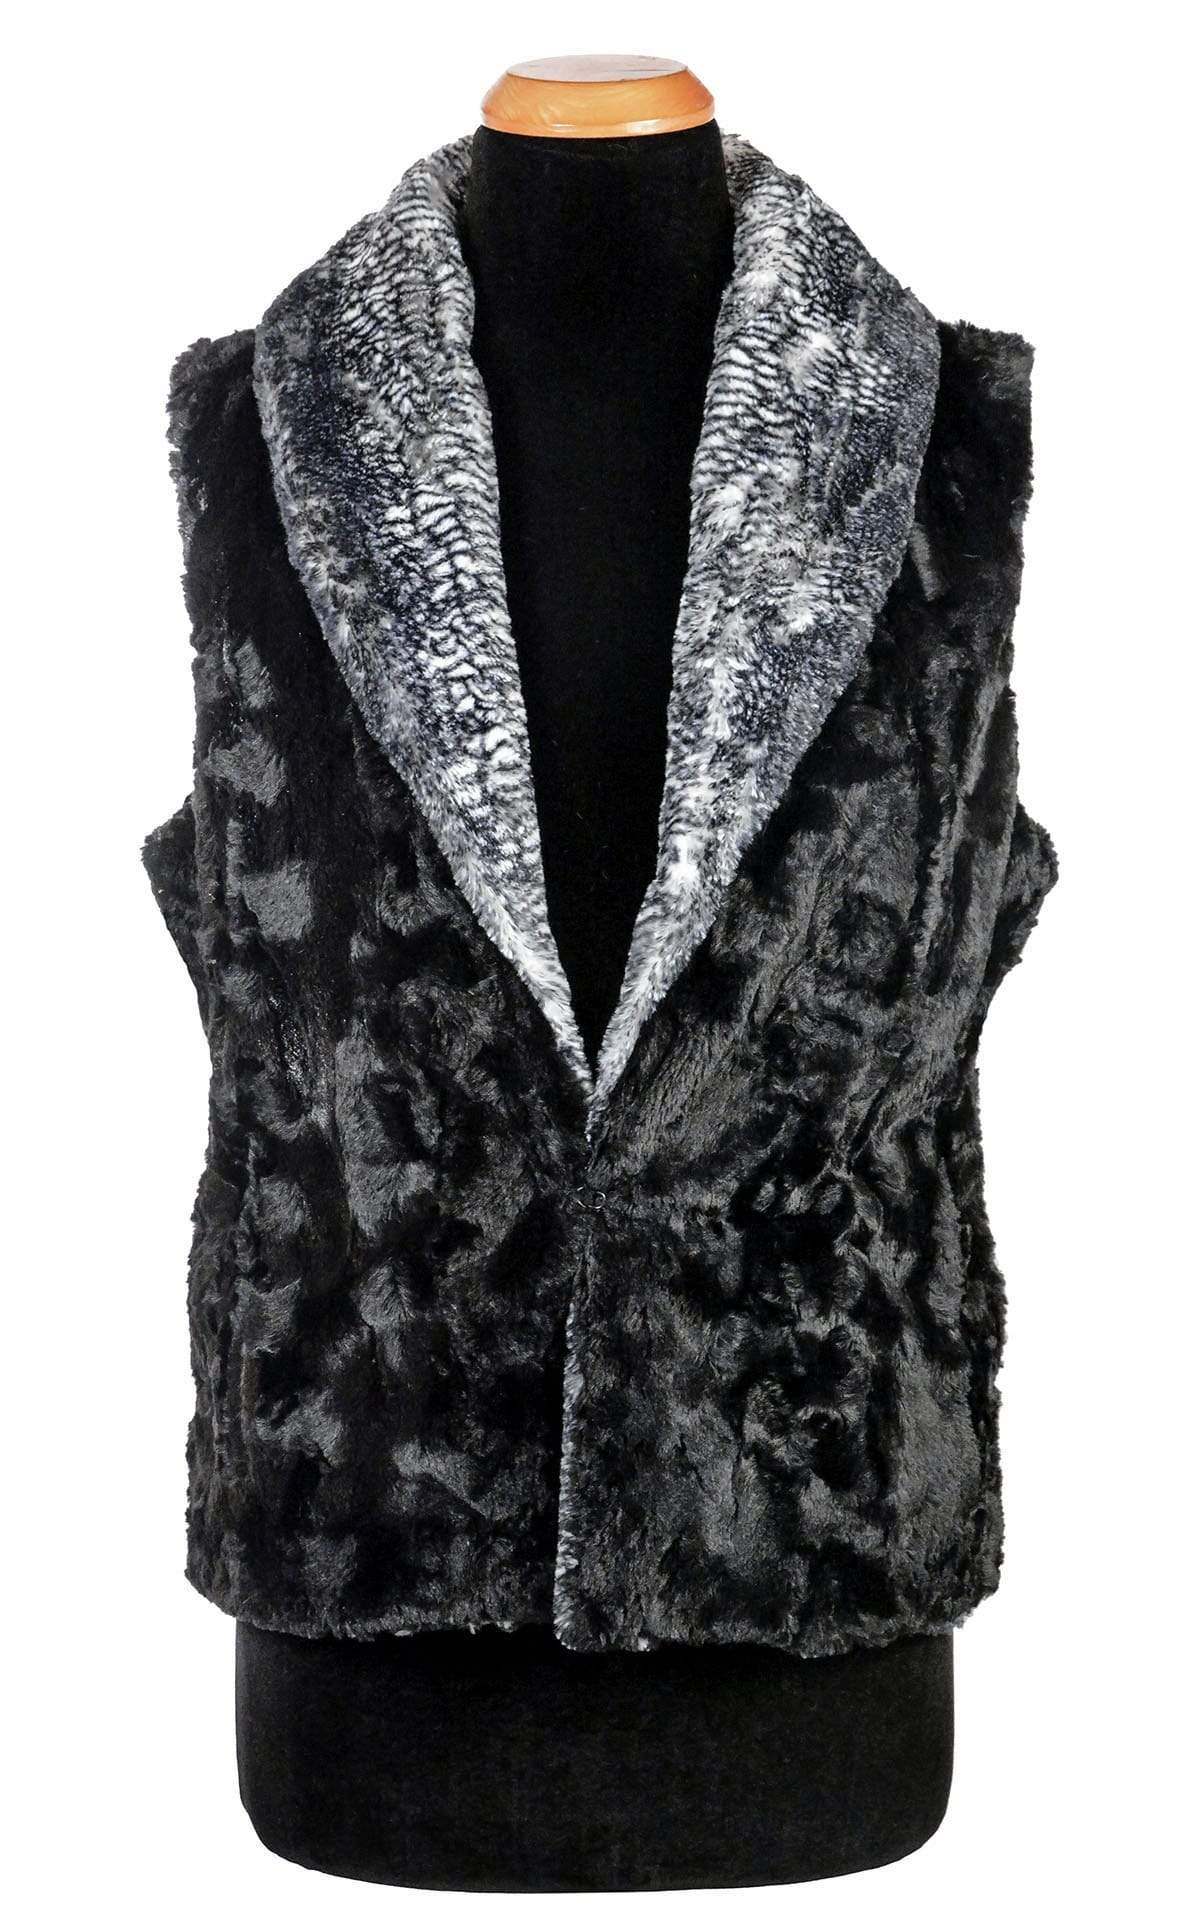 Closed View of Shawl Collar Vest, Reversed | Black Mamba Faux Fur with Cuddly Faux Fur in Black | By Pandemonium Millinery | Seattle WA USA